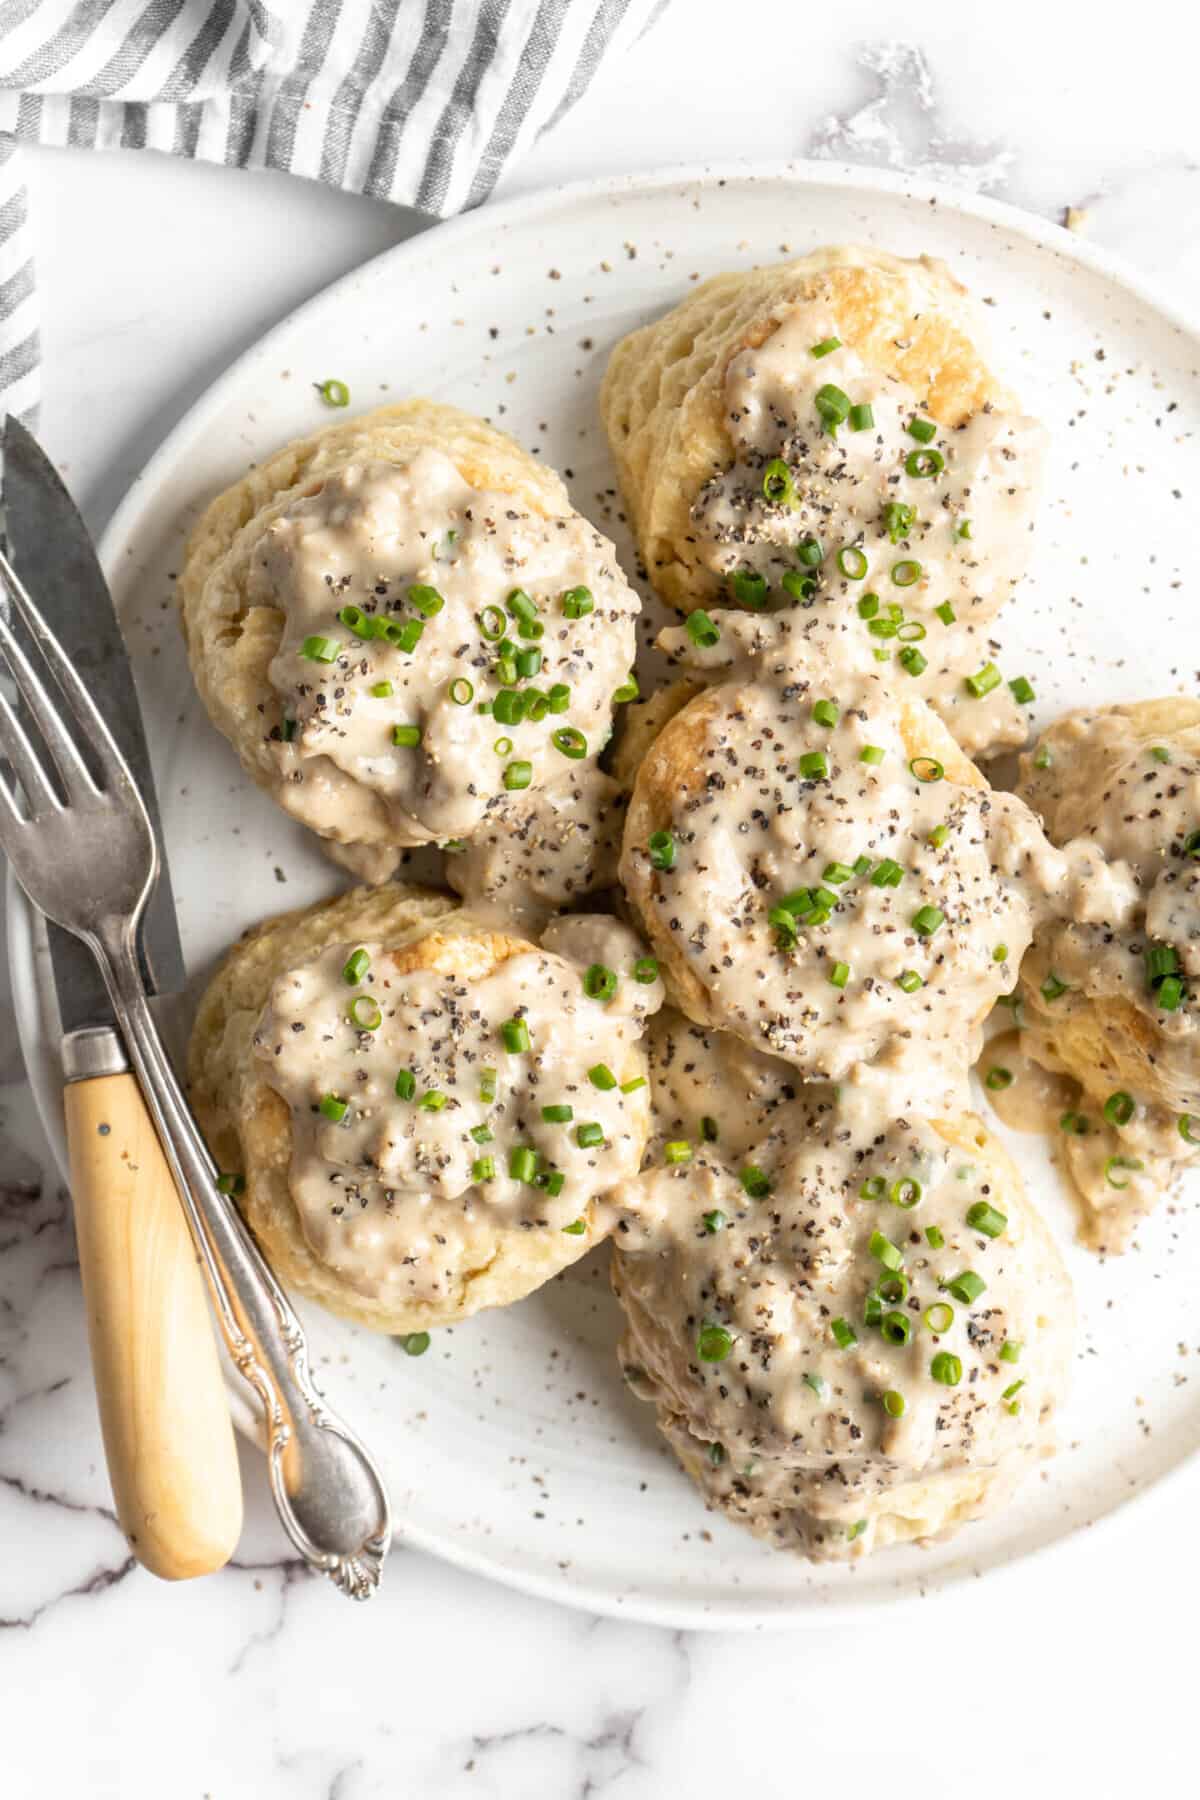 A plate with six biscuits covered in gravy and chives, with a fork and a knife